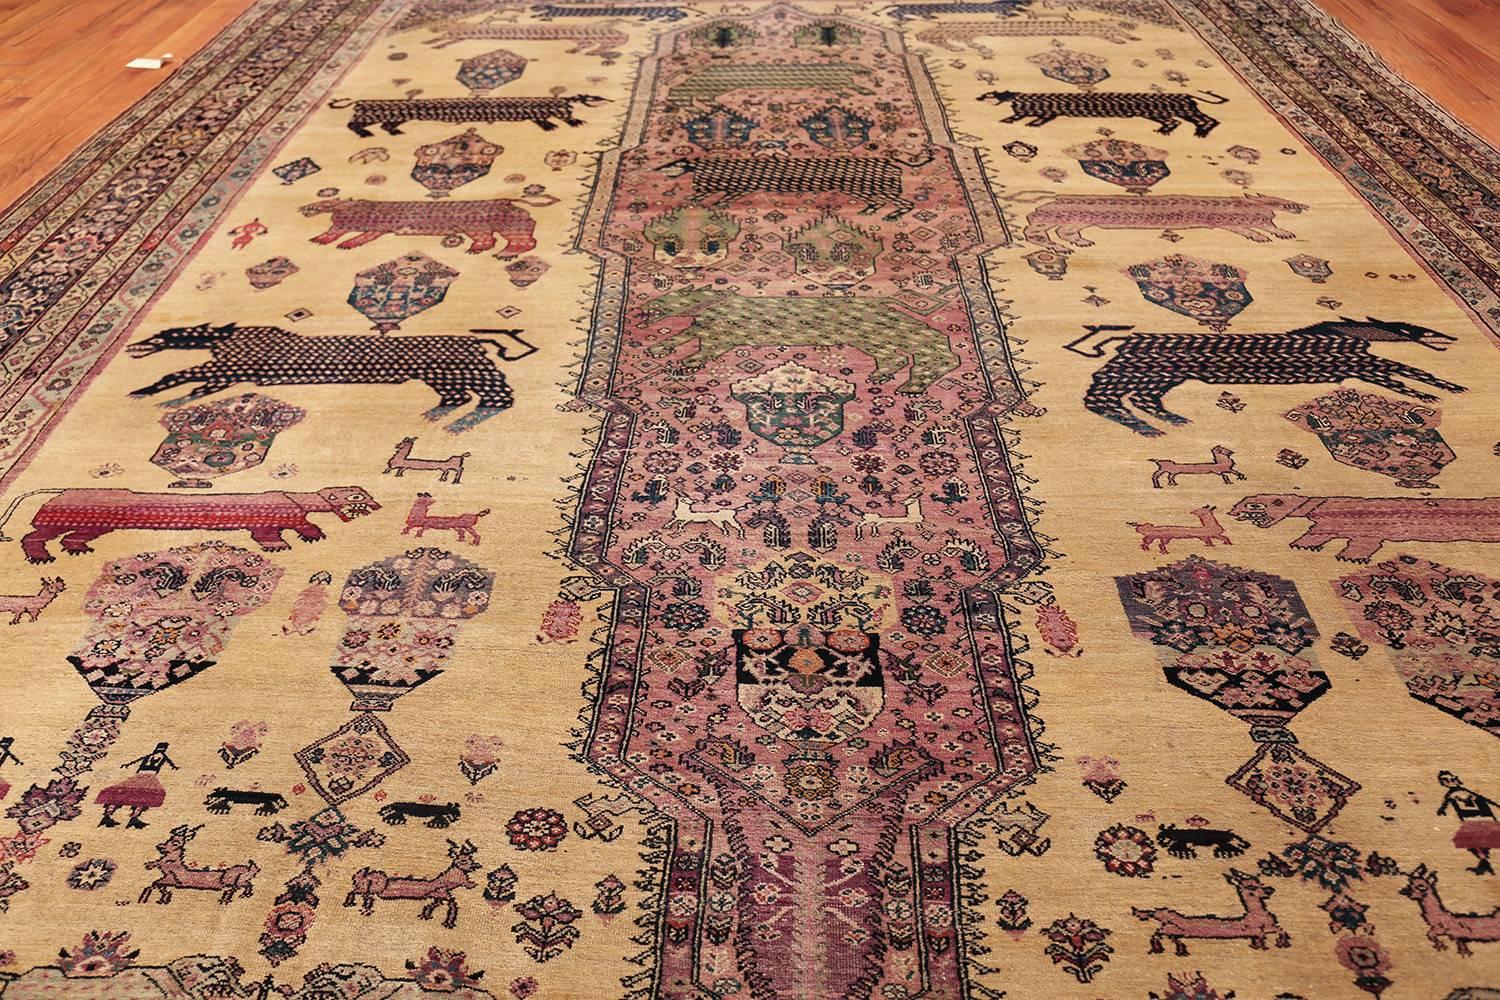 Hand-Knotted Large Animal Motif Antique Farahan Persian Rug. Size: 12 ft 2 in x 16 ft 